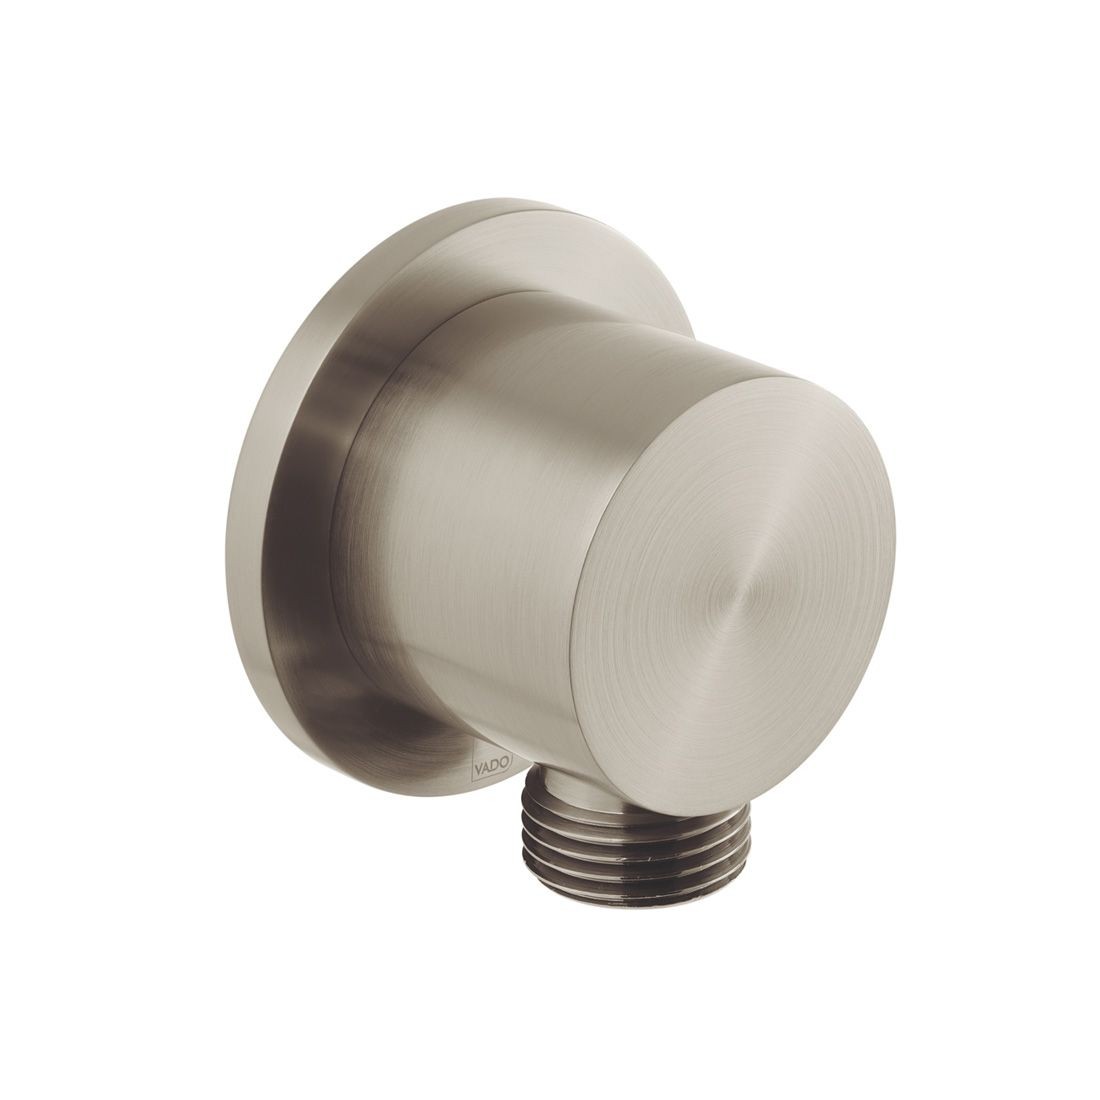 Individual by Vado Wall Outlet 55mm Round Brushed Nickel [IND-OUTLET/RO2-BRN]